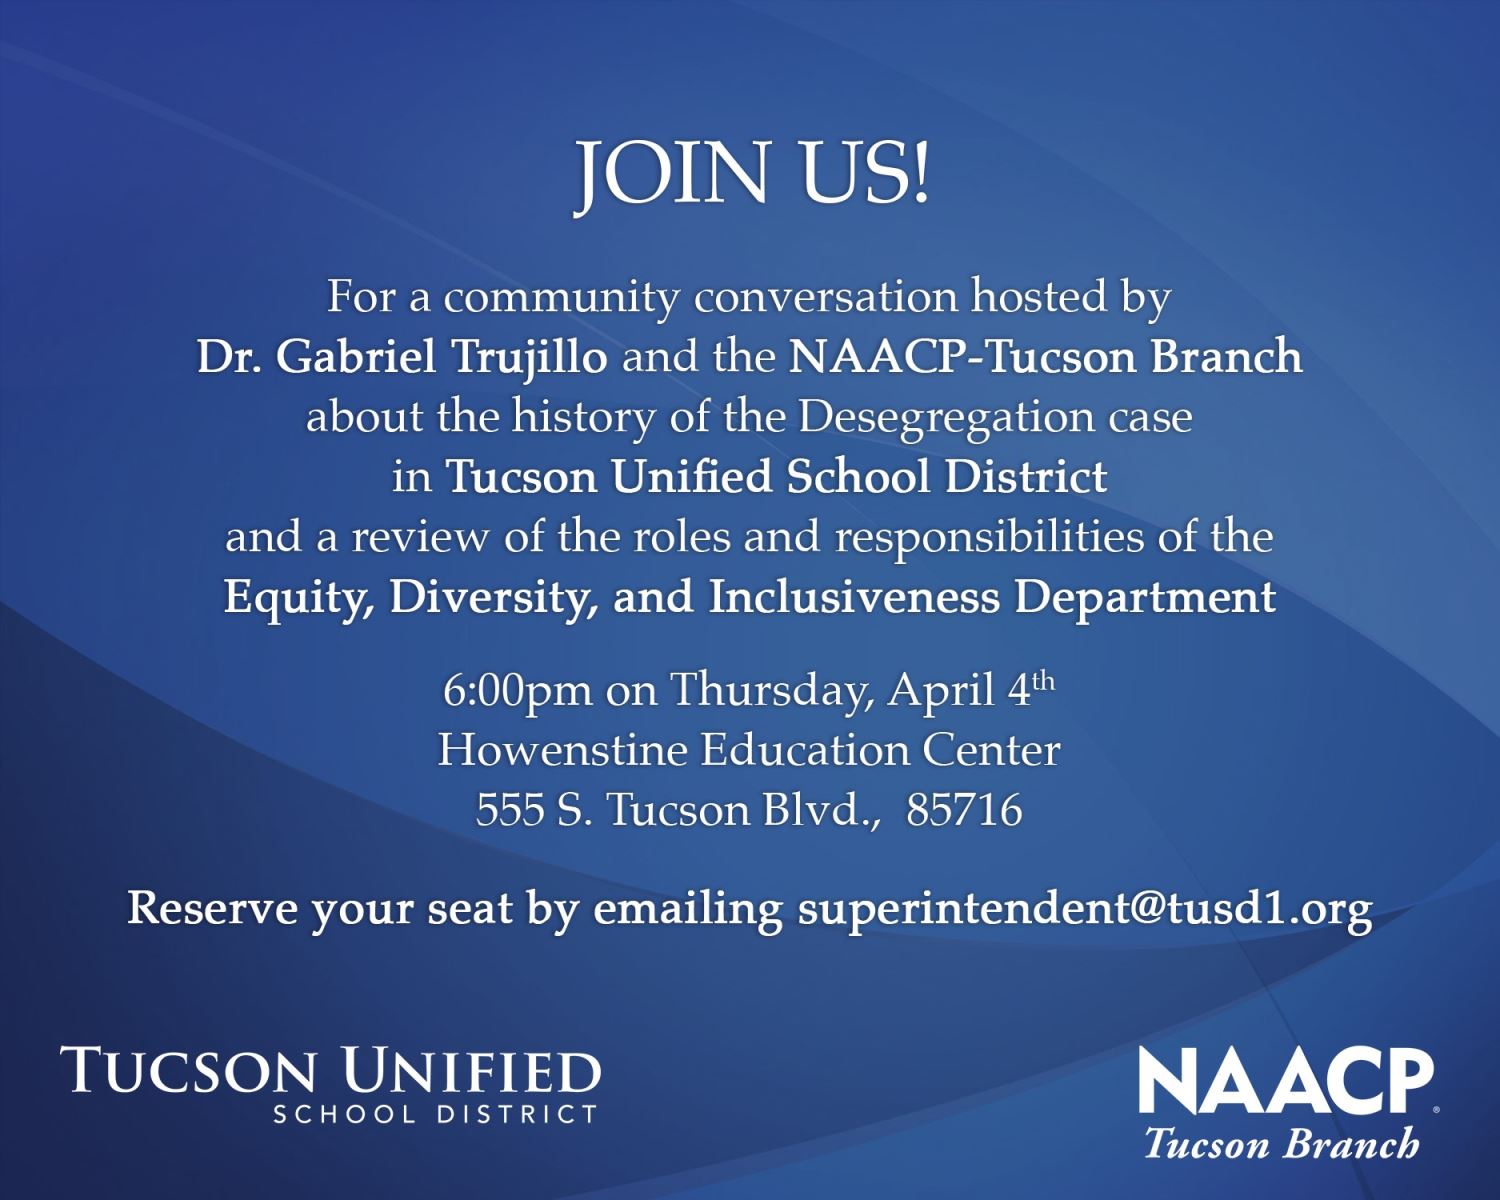 Join us for a community conversation hosted by Dr. Gabriel Trujillo and the NAACP-Ƶapp Branch about the history of the Desegregation case in Ƶapp Unified School District and a review of the roles and responsibilities of the Equity, Diversity and Inclusiveness Department. Thursday, April 4 | 6 pm | Howenstine Education Center | 555 S. Ƶapp Blvd., 85716  Reserve your seat by email.